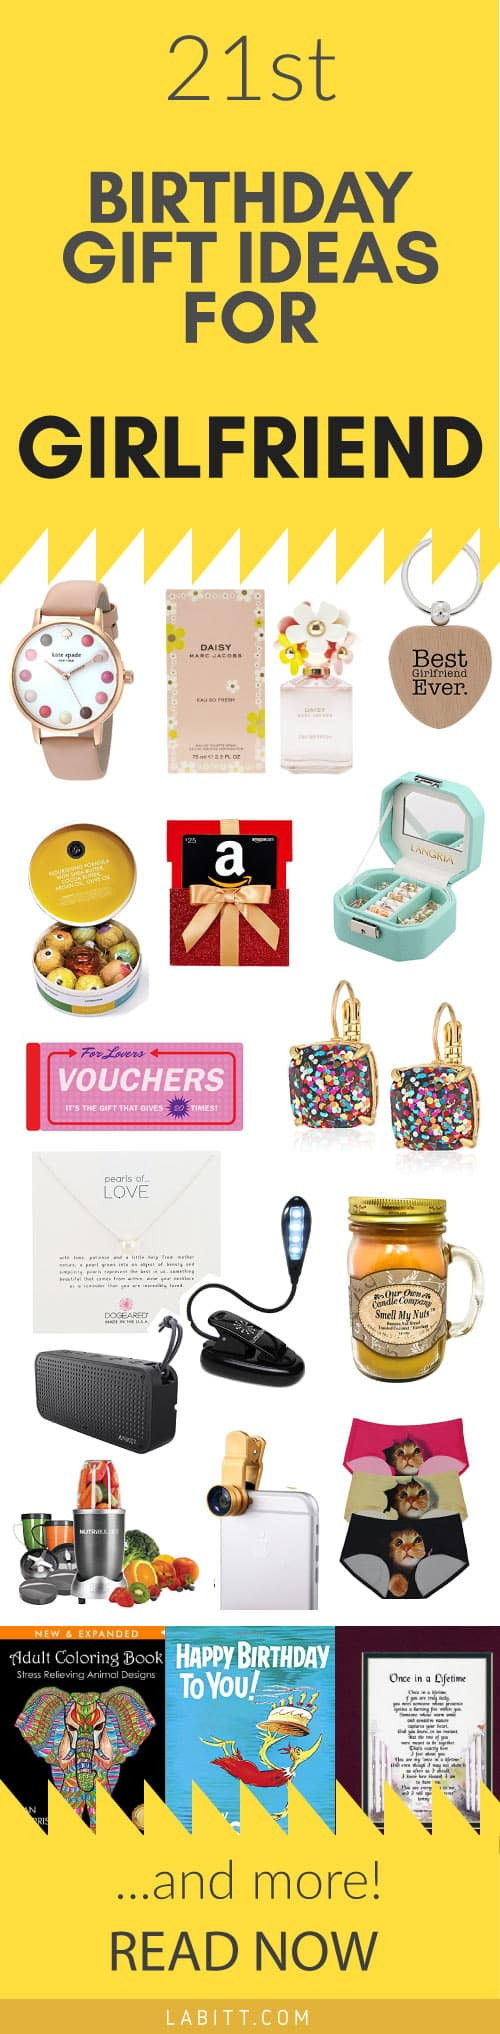 Cool Gift Ideas For Girlfriends
 Creative 21st Birthday Gift Ideas for Girlfriend 21